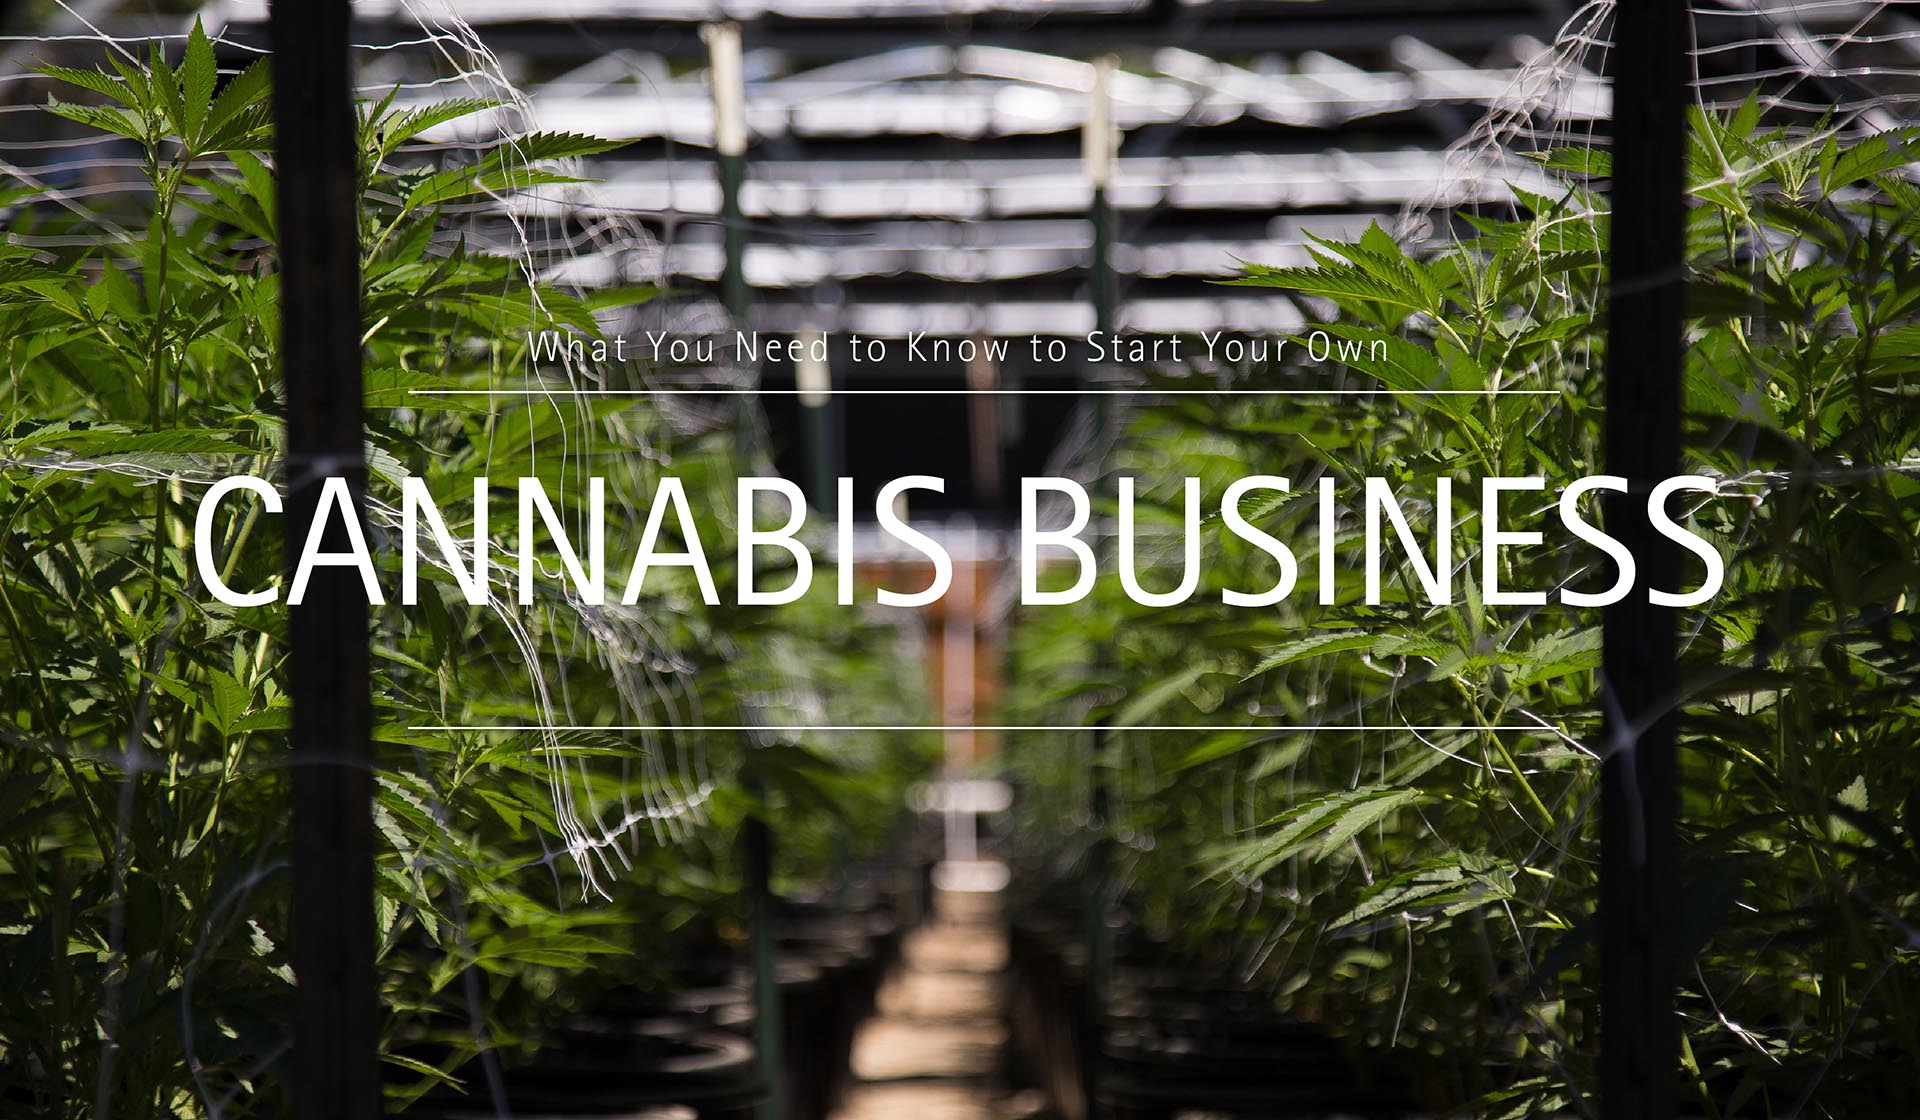 What You Need to Know to Start Your Own Cannabis Business